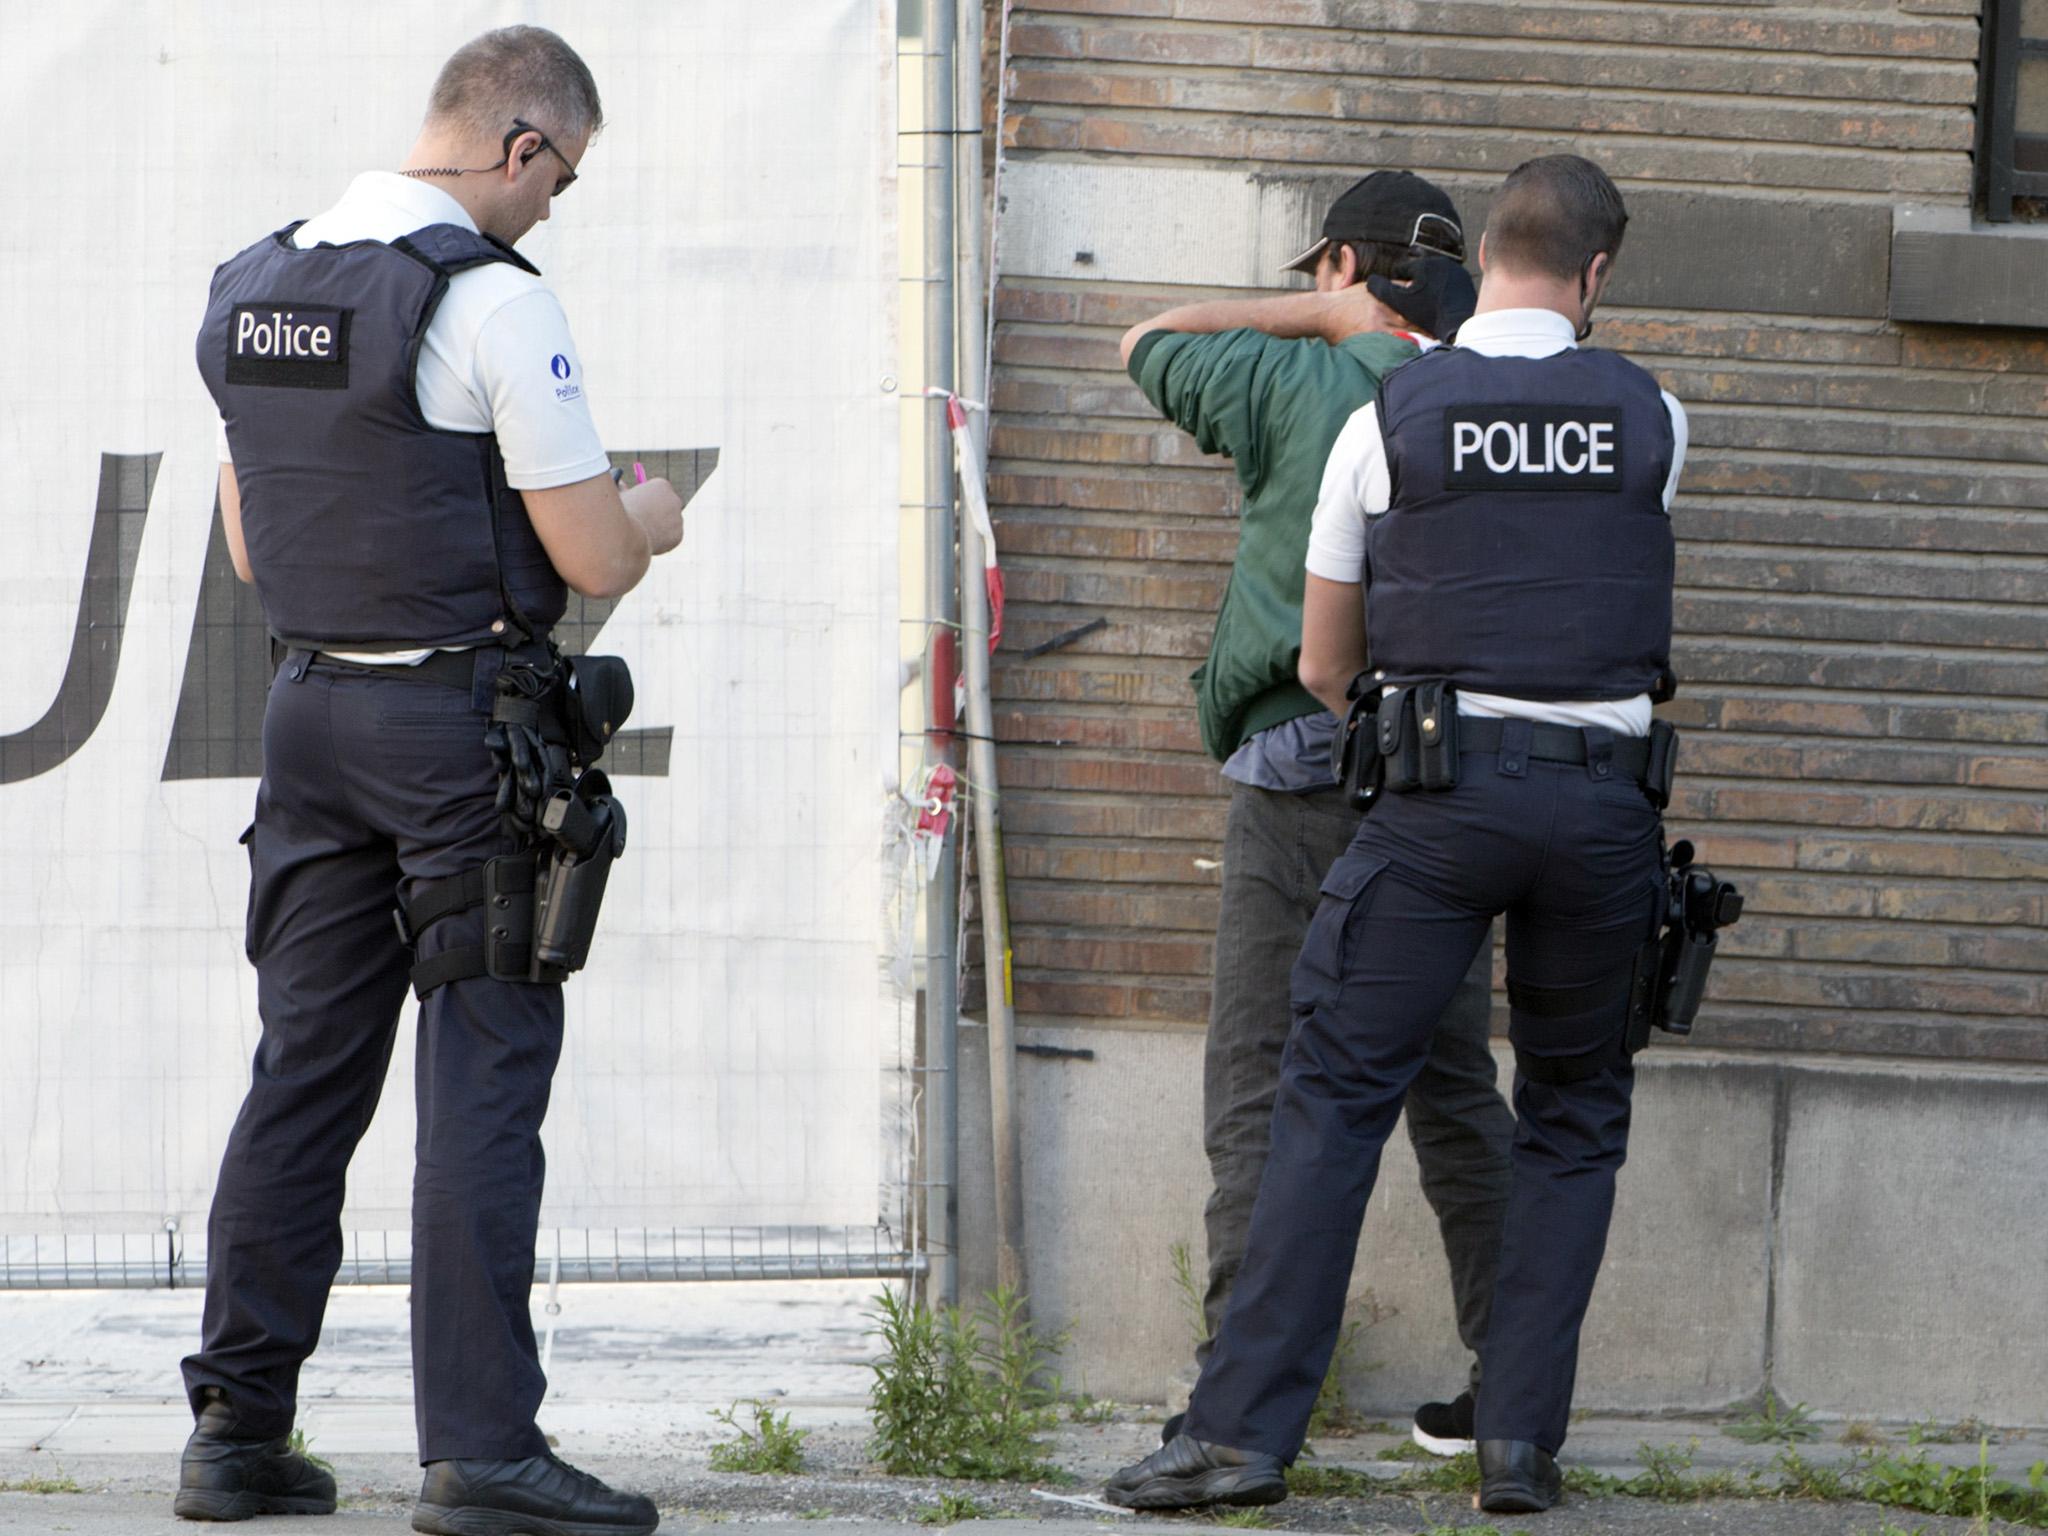 Police officers check identification of a man near the police headquarters in Charleroi